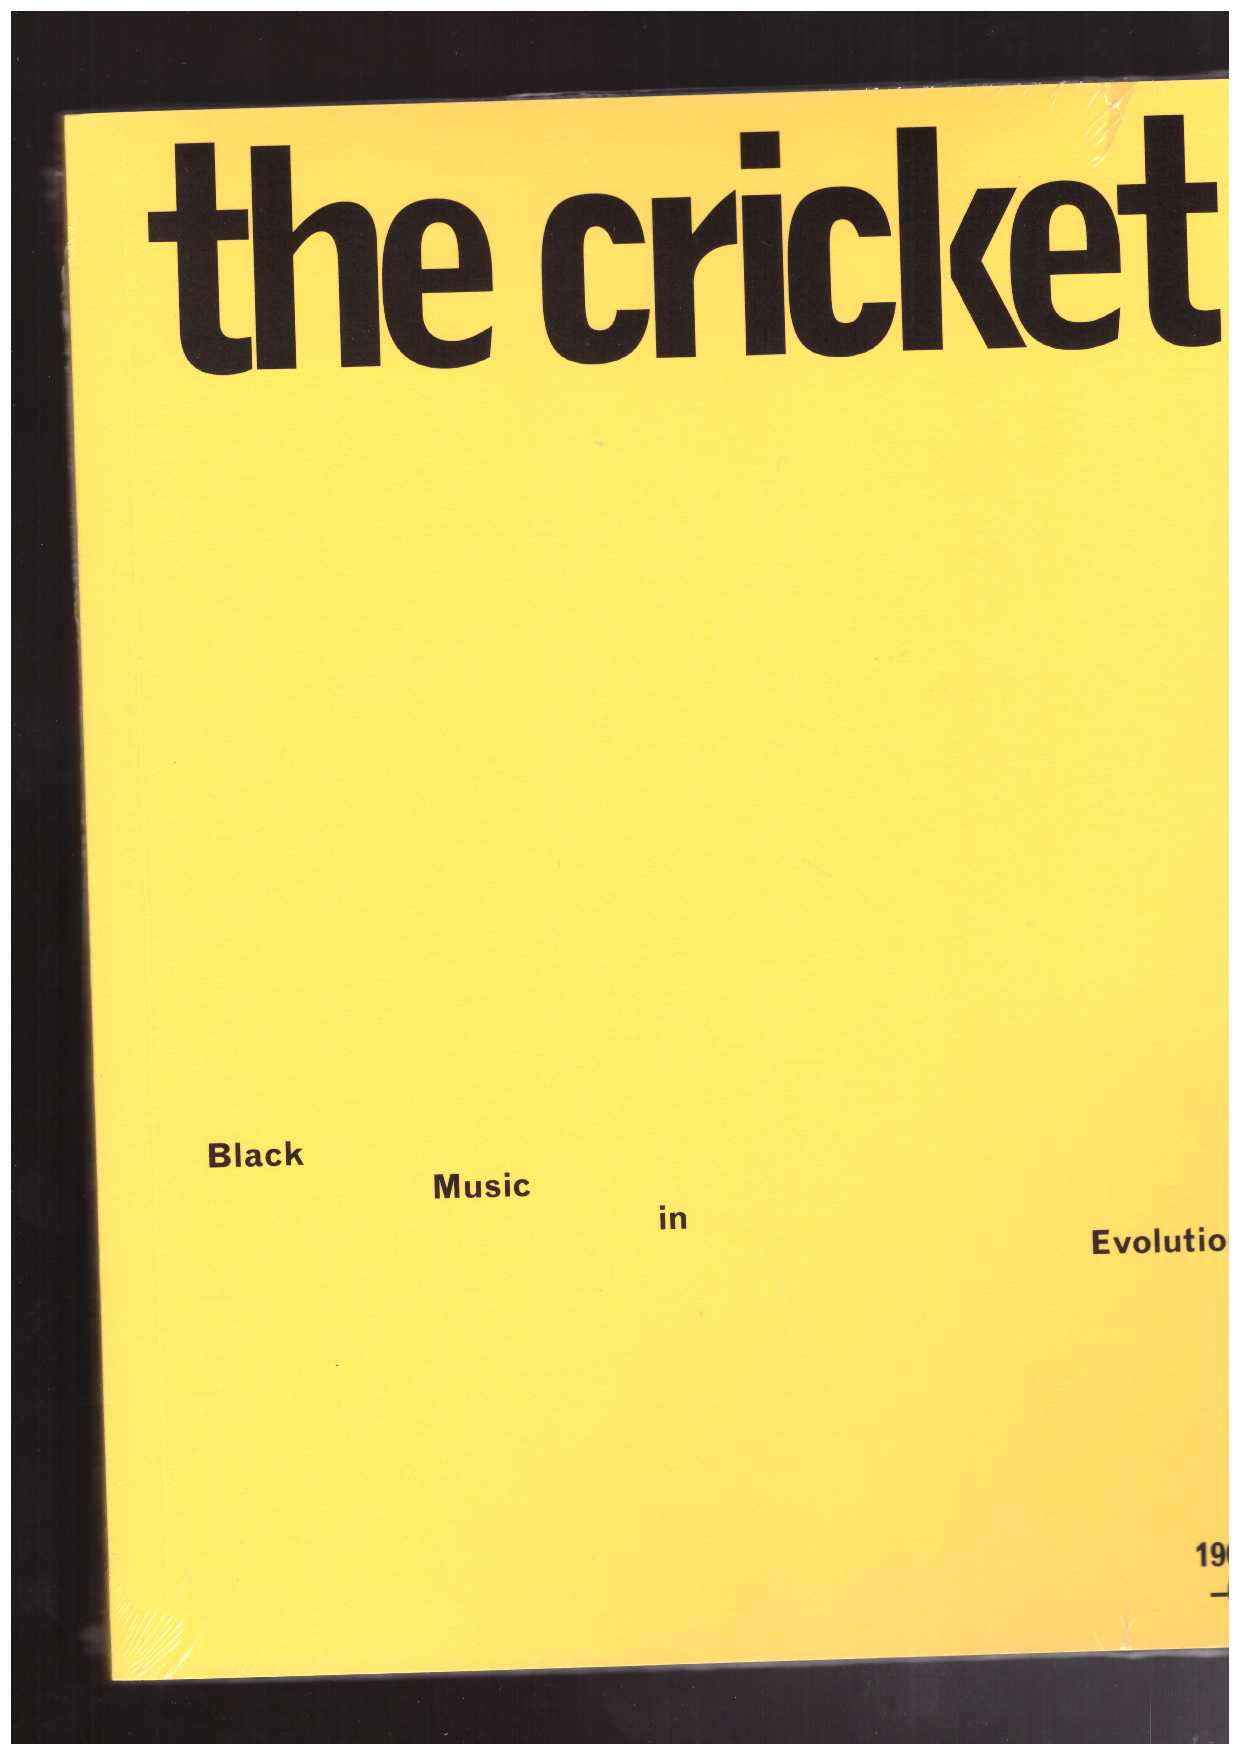 Various - The Cricket. Black Music in Evolution, 1968-69